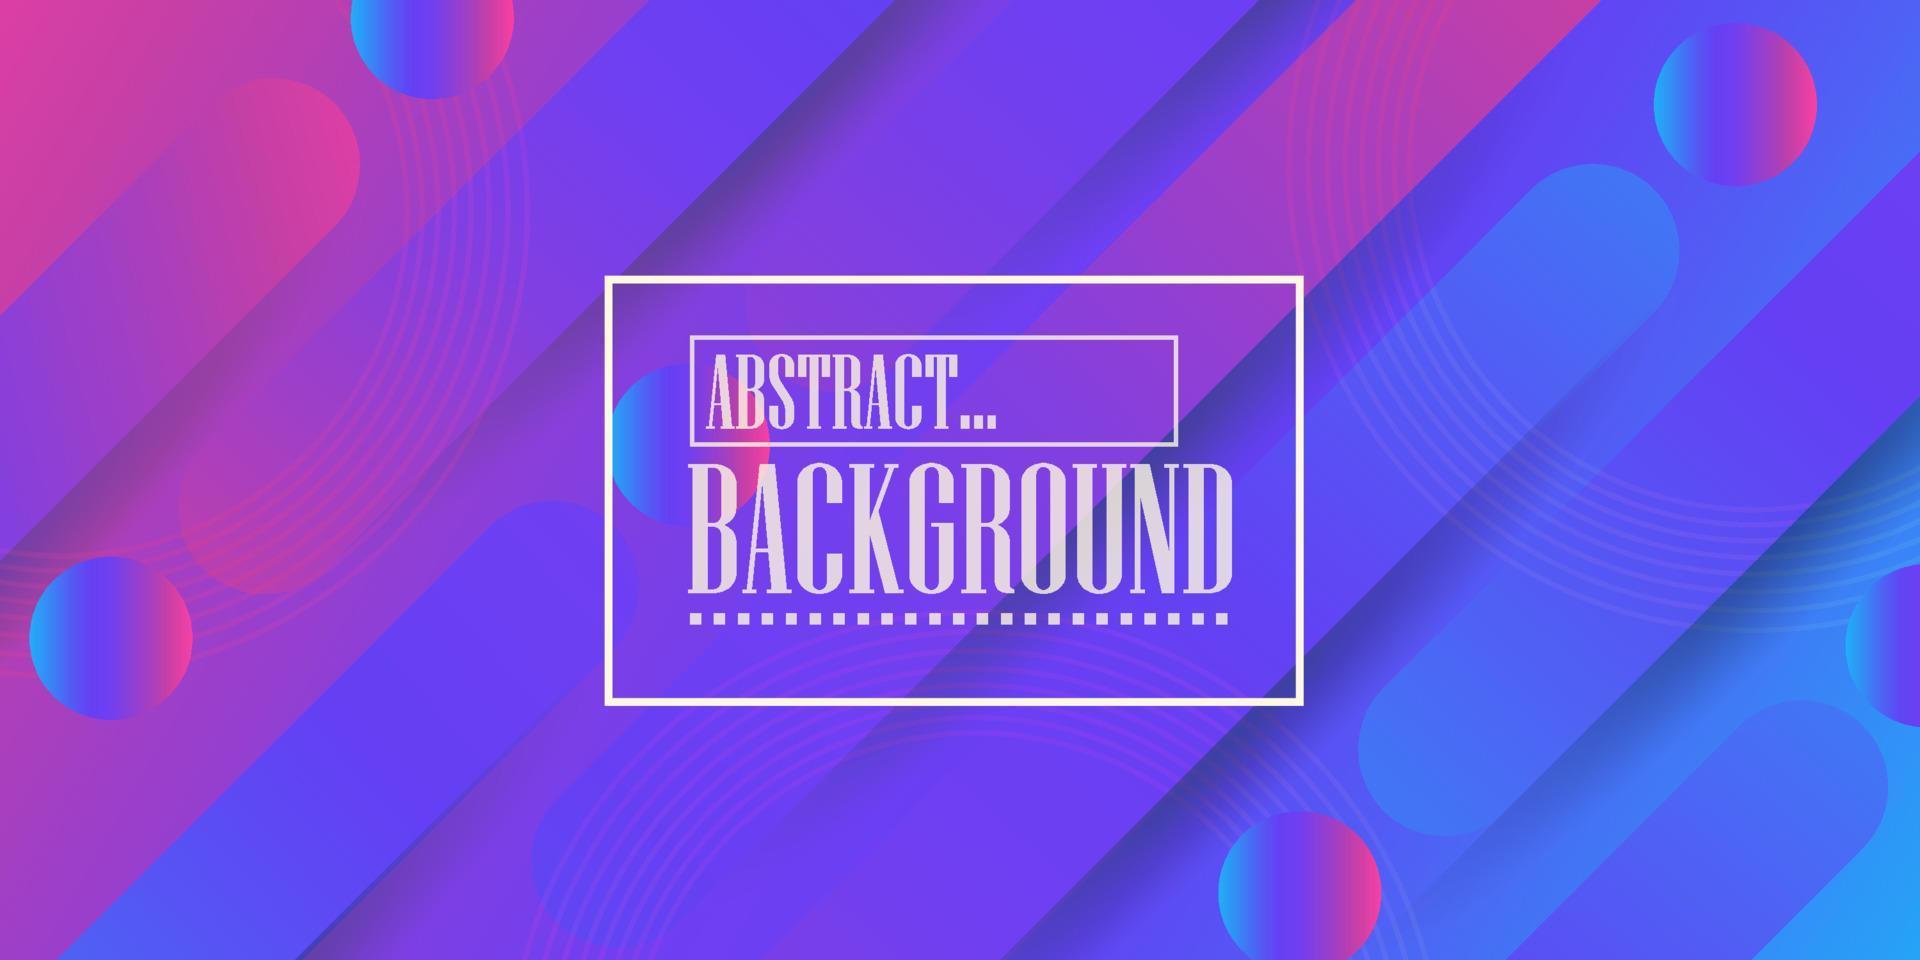 Fluid gradient background design layout for banner or poster. Cool 3d liquid vector pattern with red shapes in motion